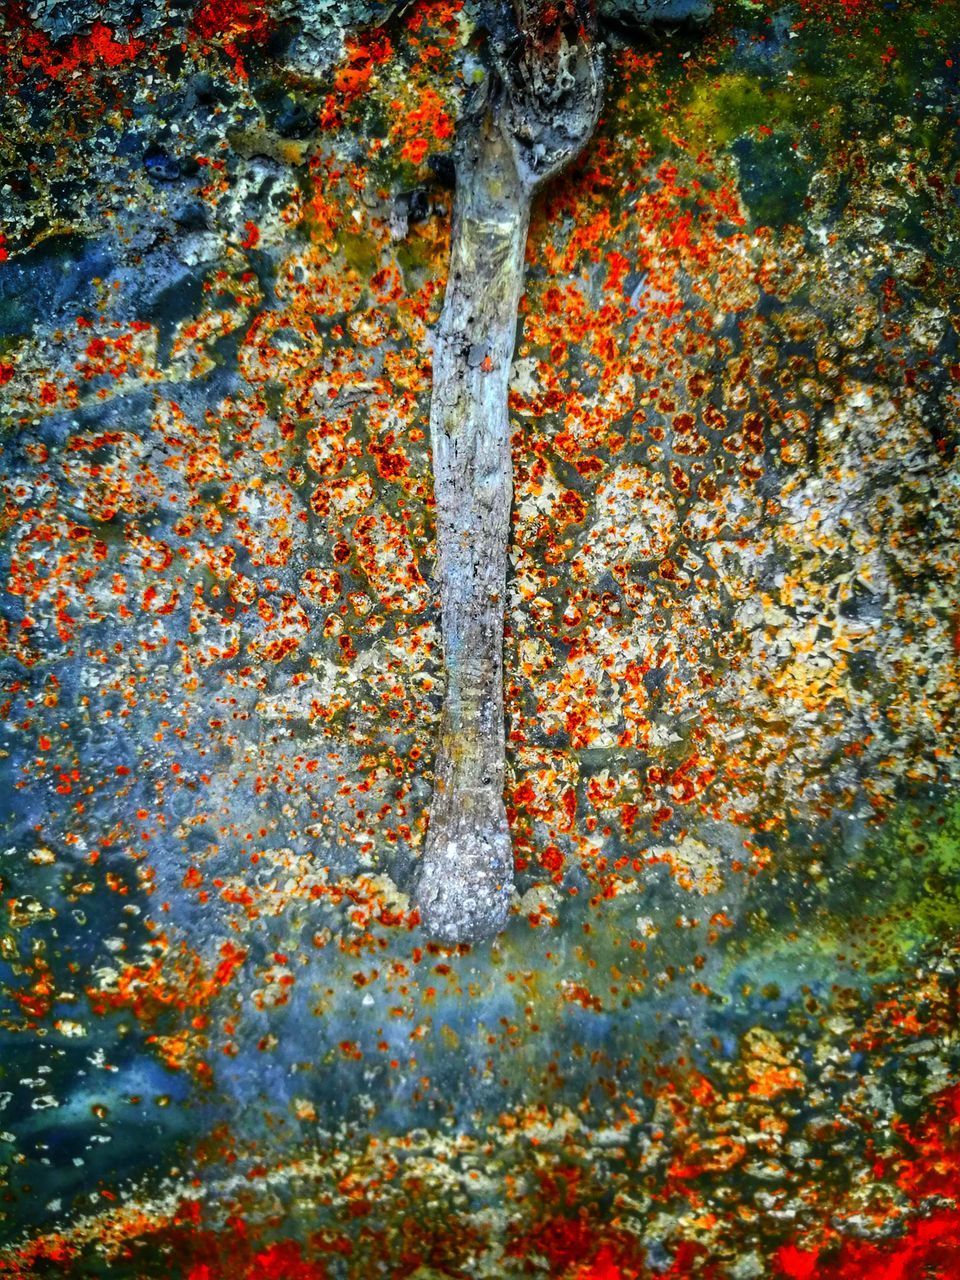 FULL FRAME SHOT OF OLD TREE TRUNK WITH AUTUMN LEAVES